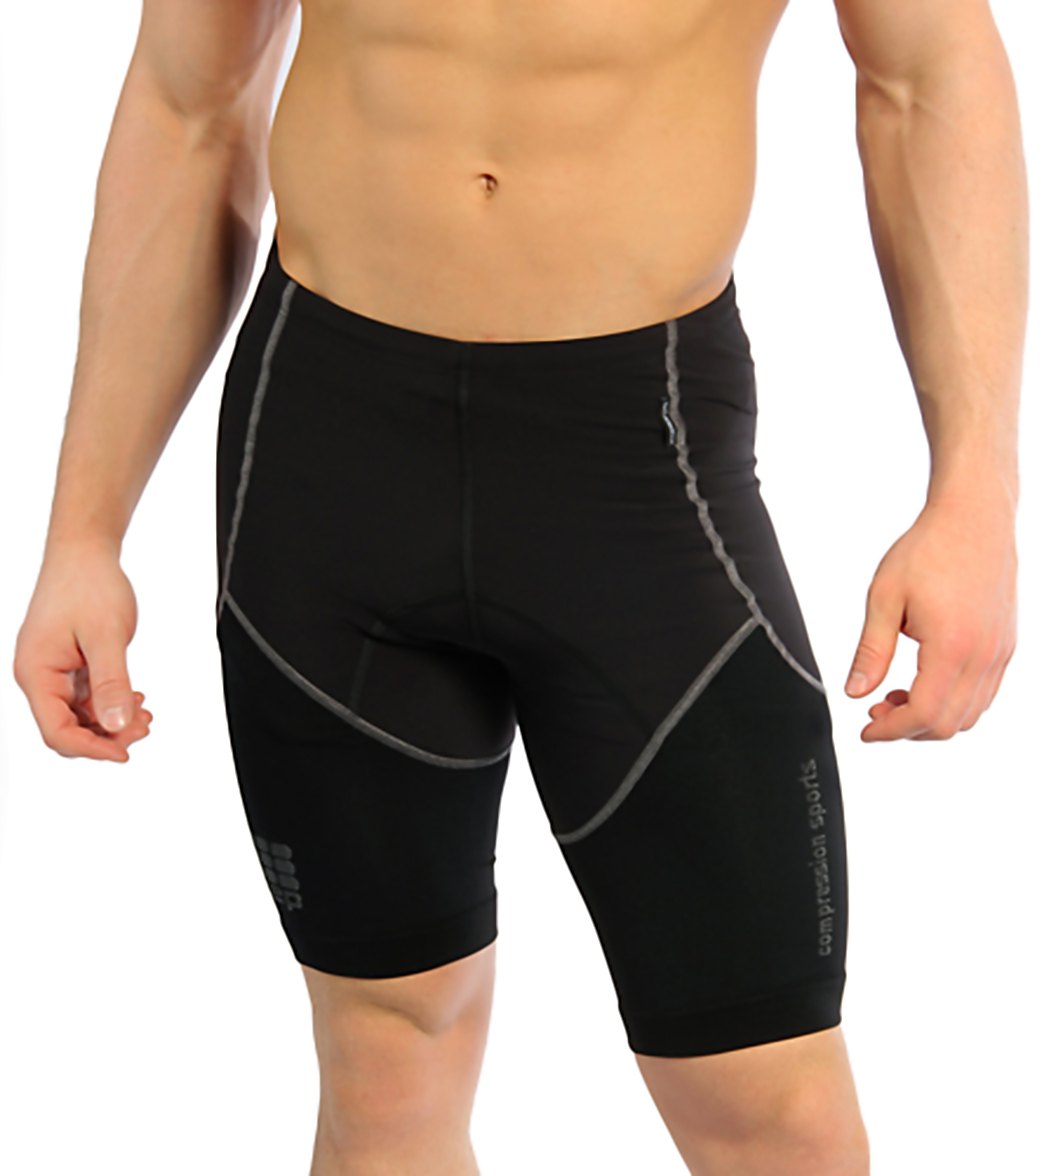 Download CEP Men's Dynamic + Running Compression Shorts at ...